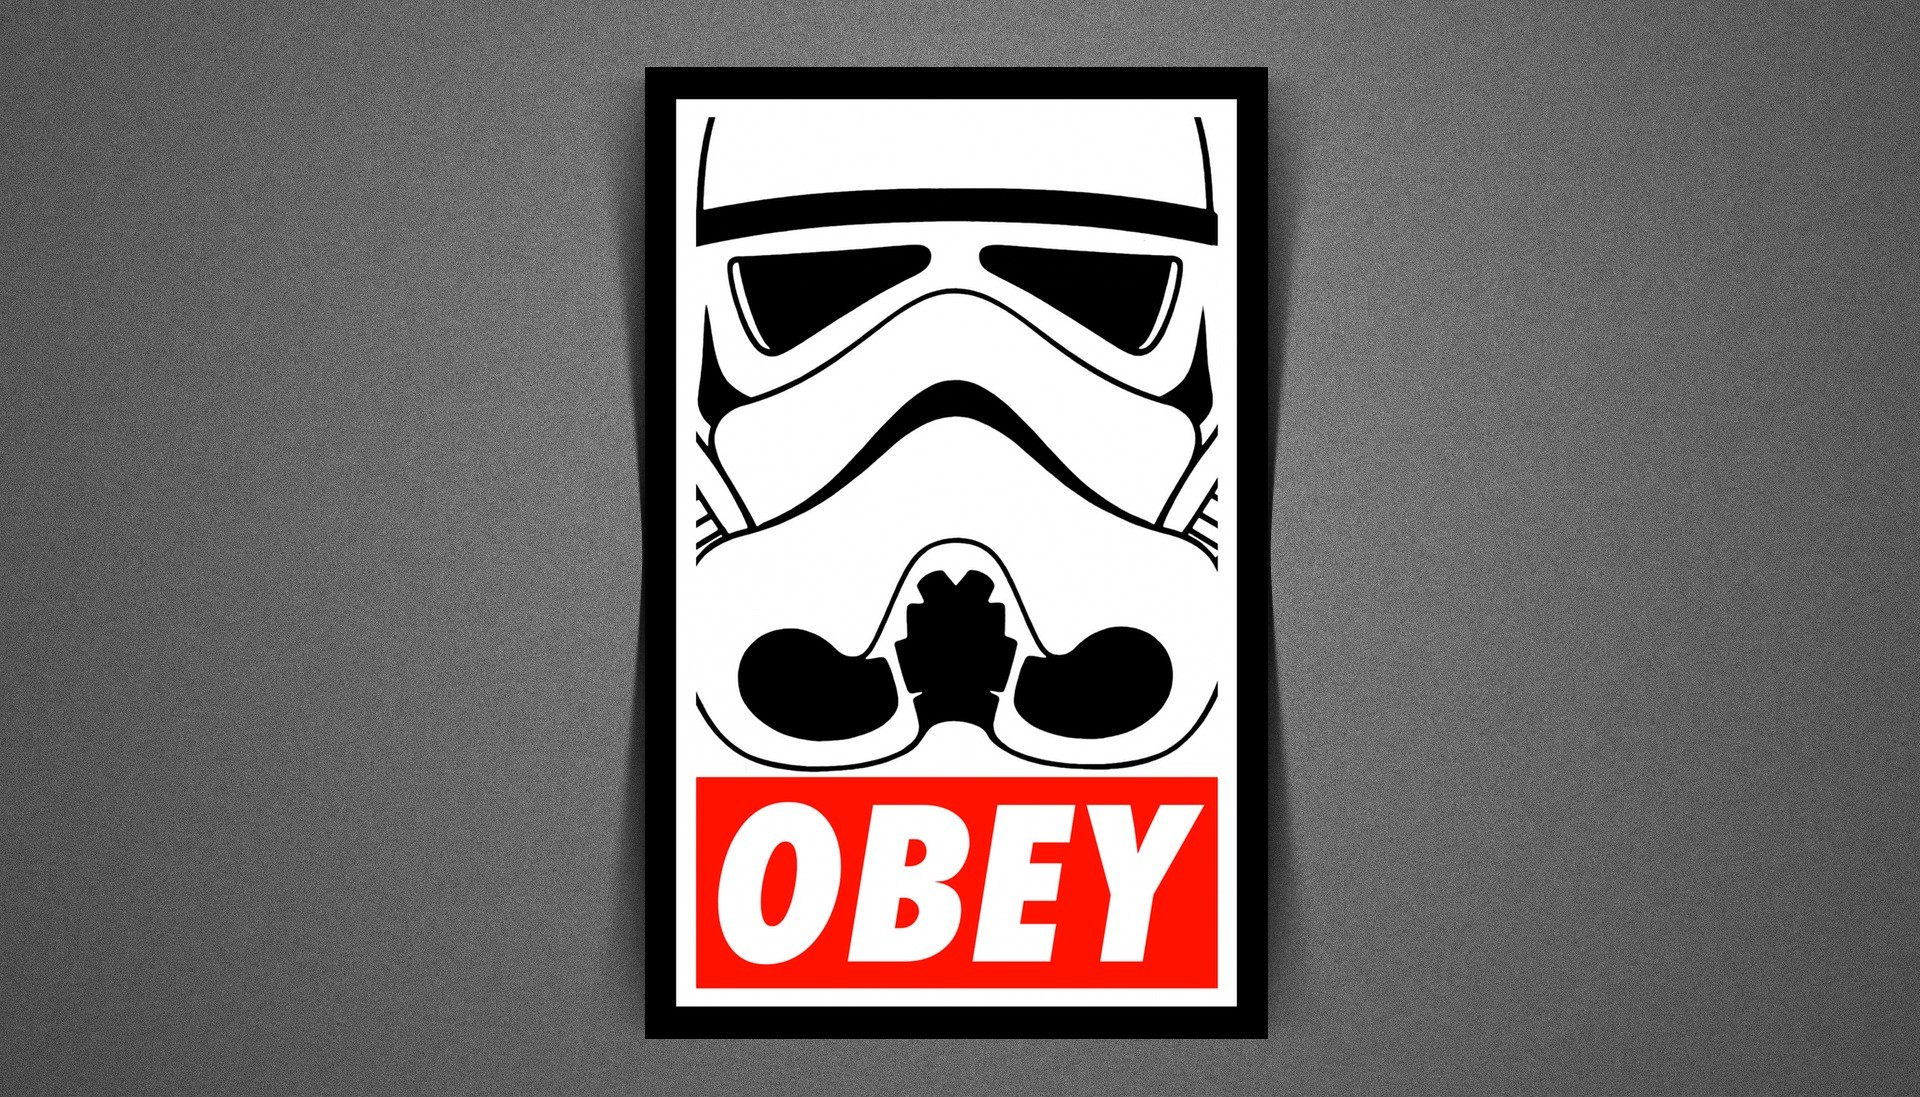 Obey Wallpaper Download Free Awesome Wallpapers For HD Wallpapers Download Free Map Images Wallpaper [wallpaper684.blogspot.com]